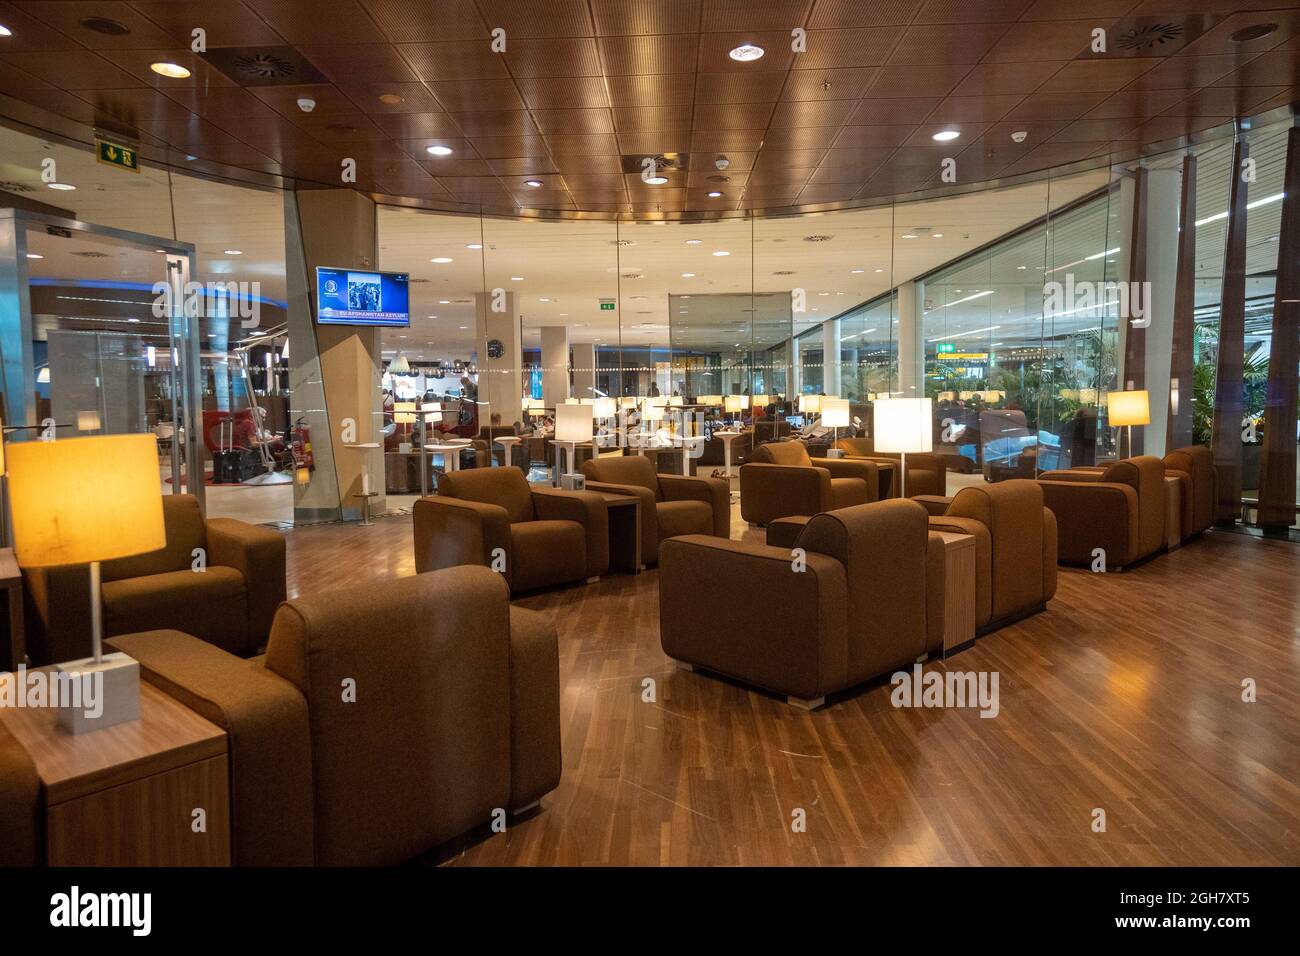 KLM Crown Lounge at Schiphol Airport in Amsterdam, The Netherlands, Europe Stock Photo